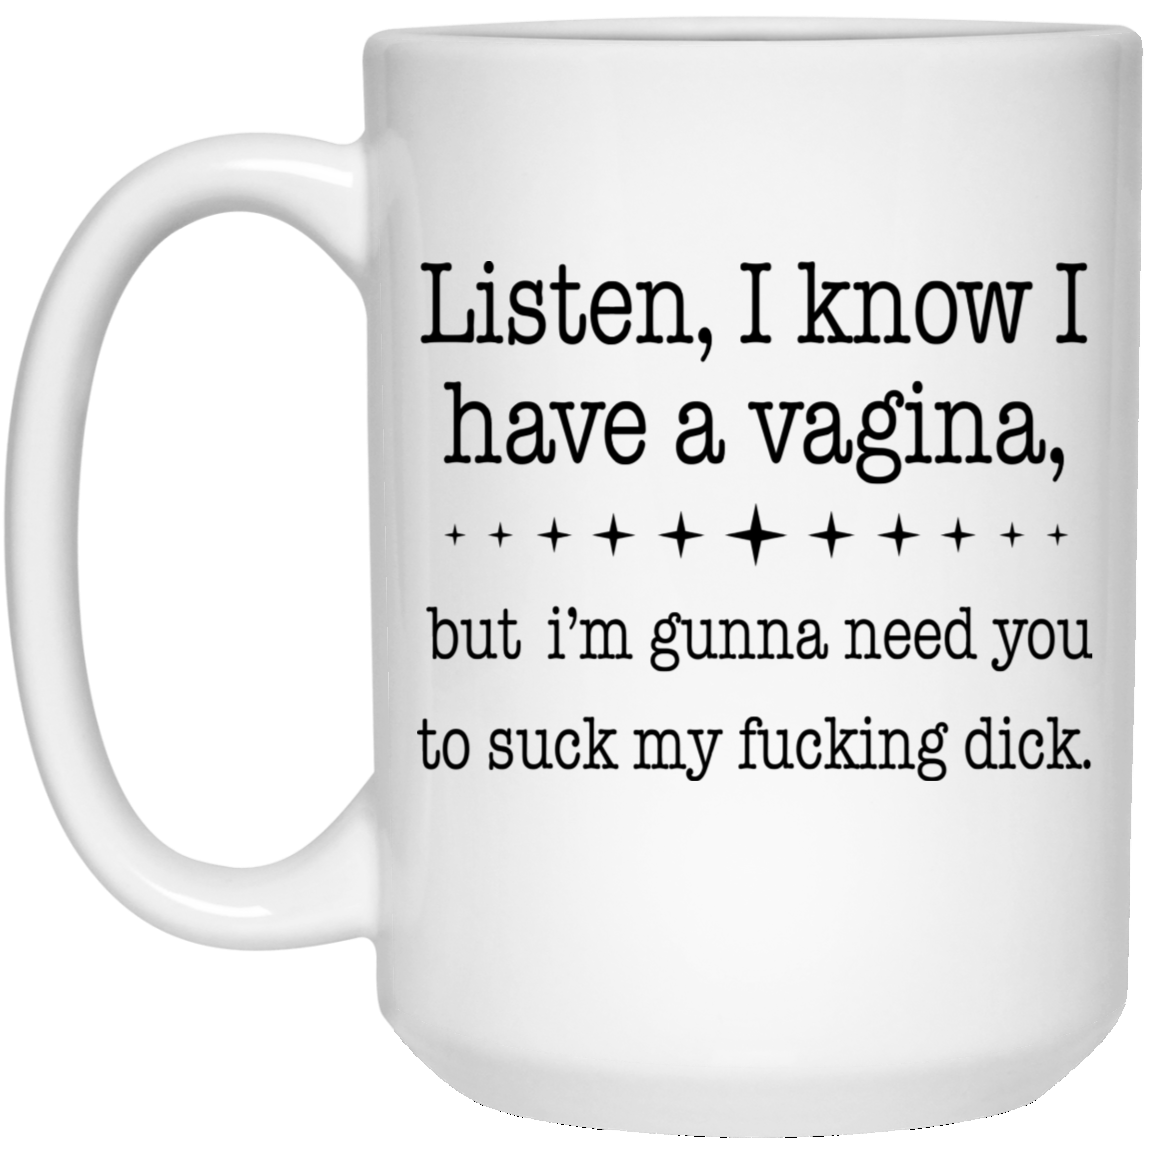 chris antolovich share suck your dick for a cup of coffee photos